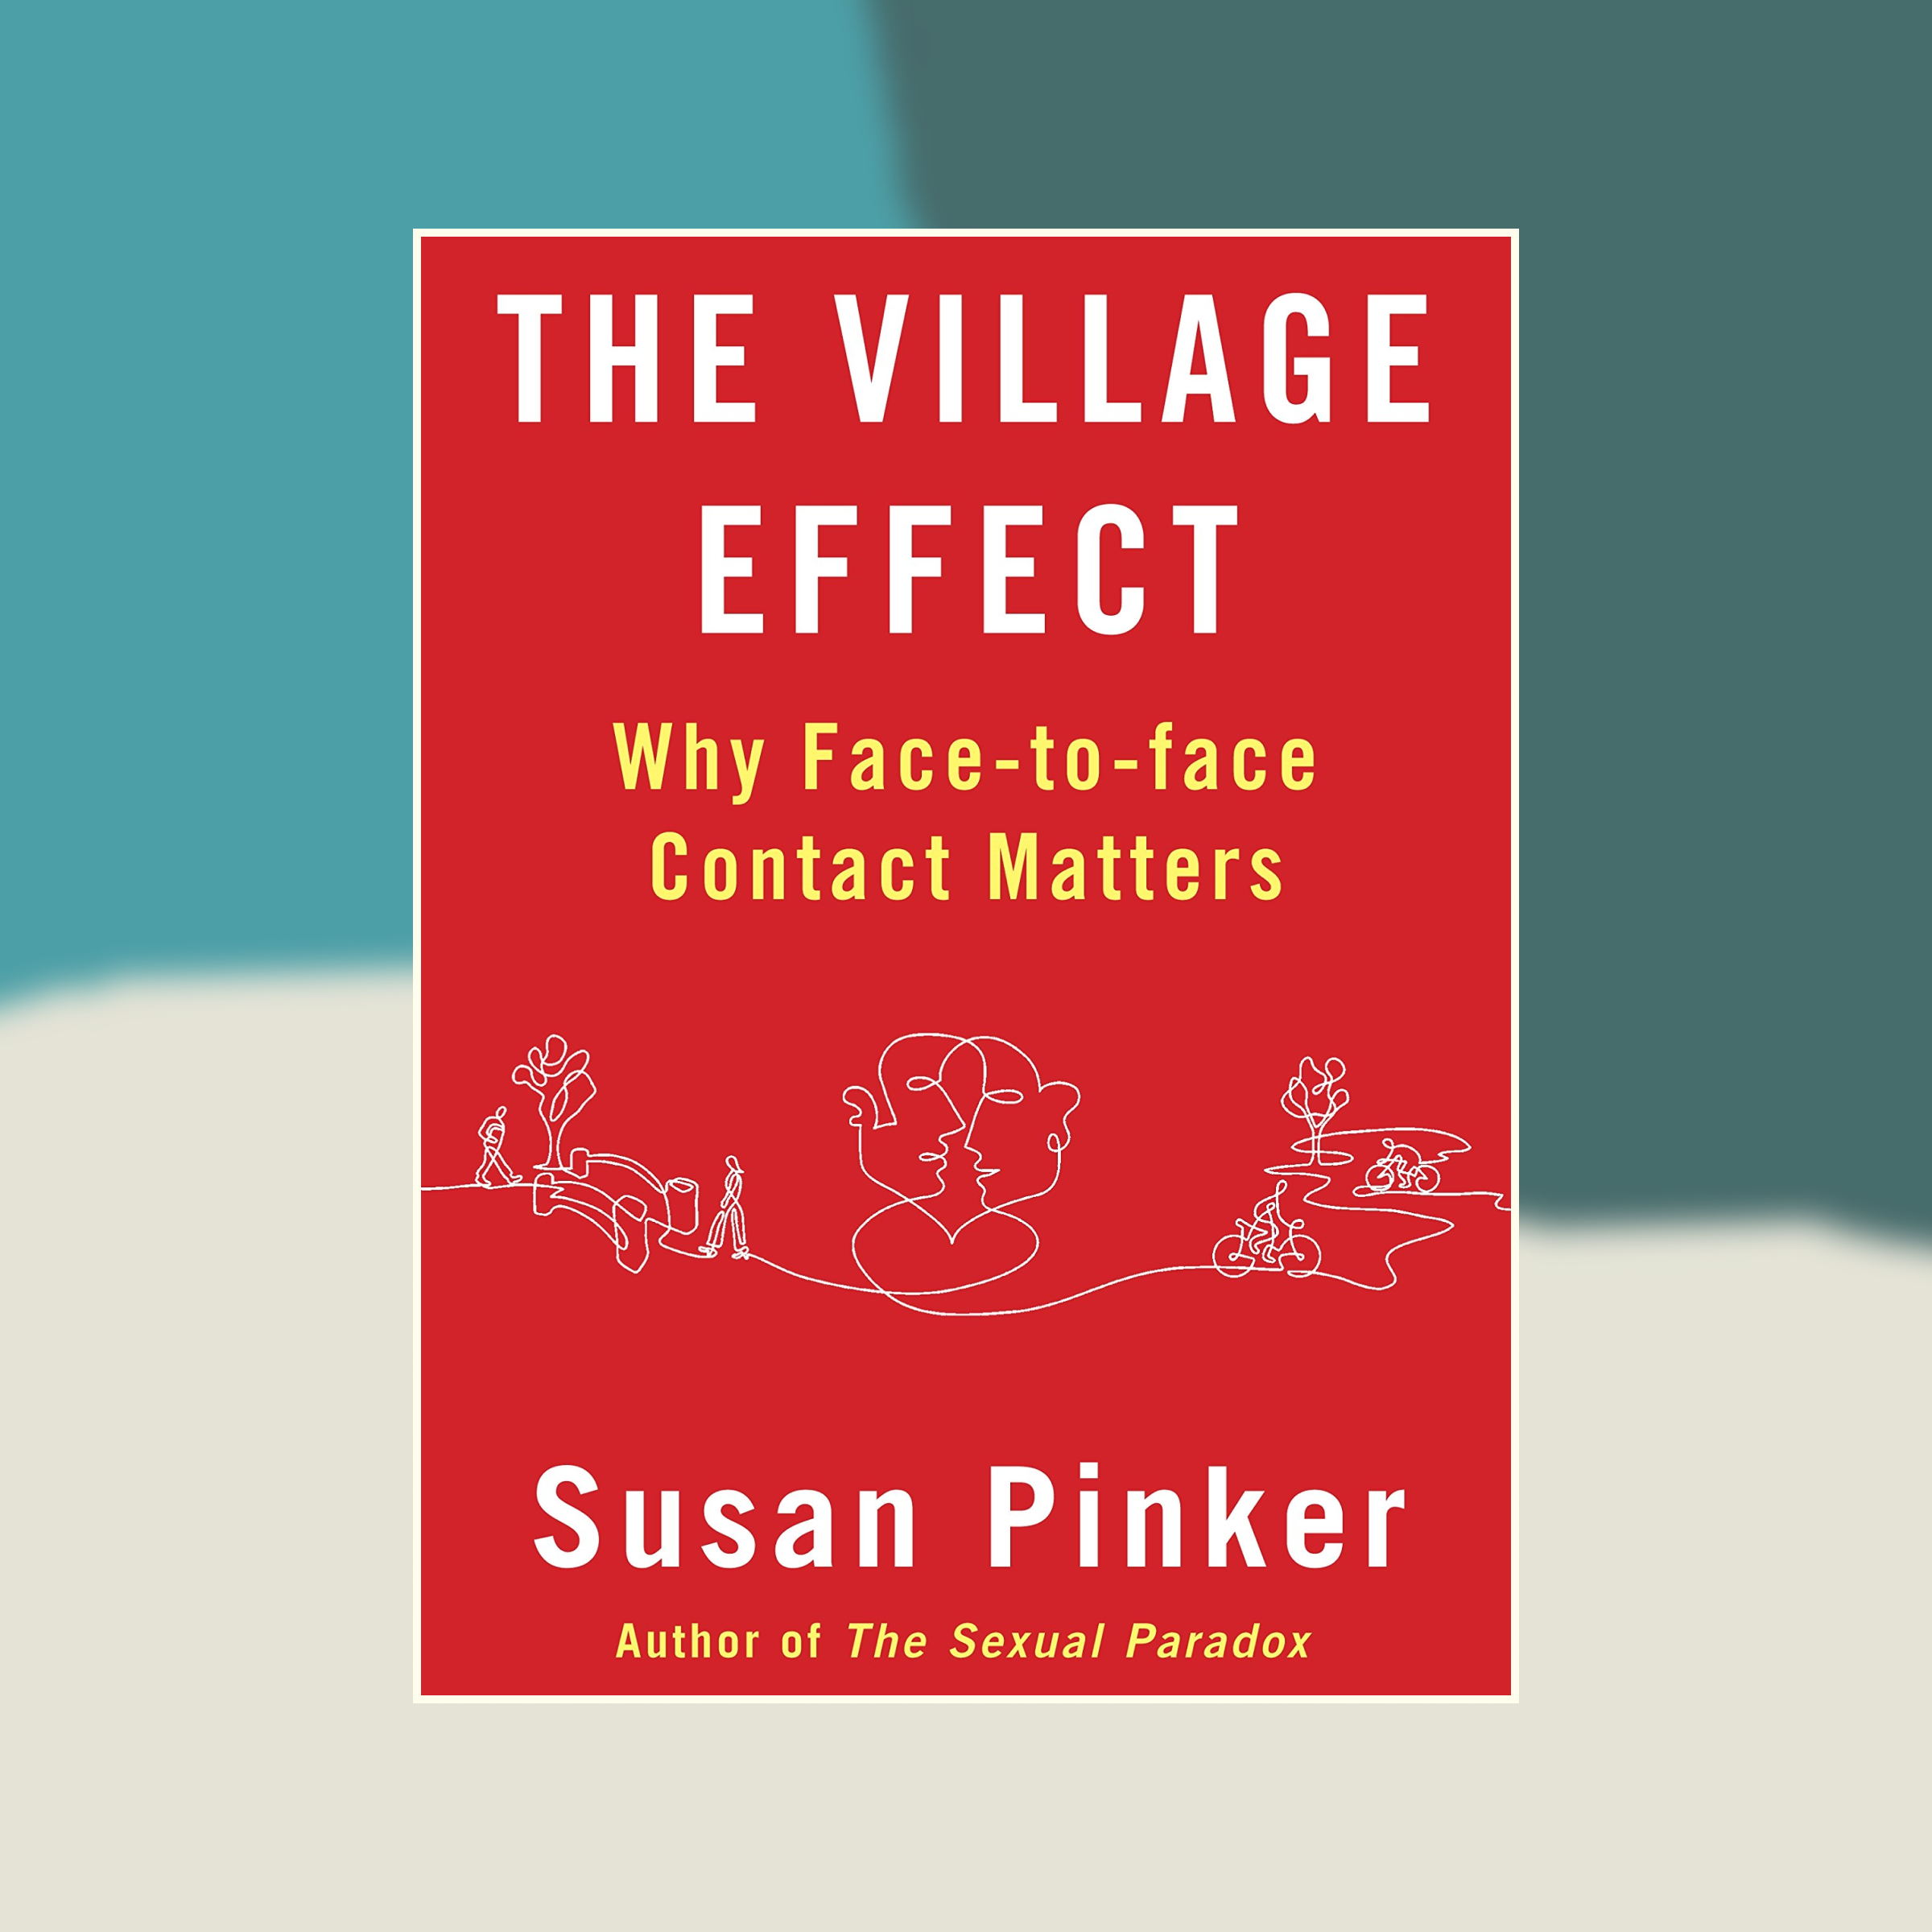 Book cover of The Village Effect against an abstract painted background